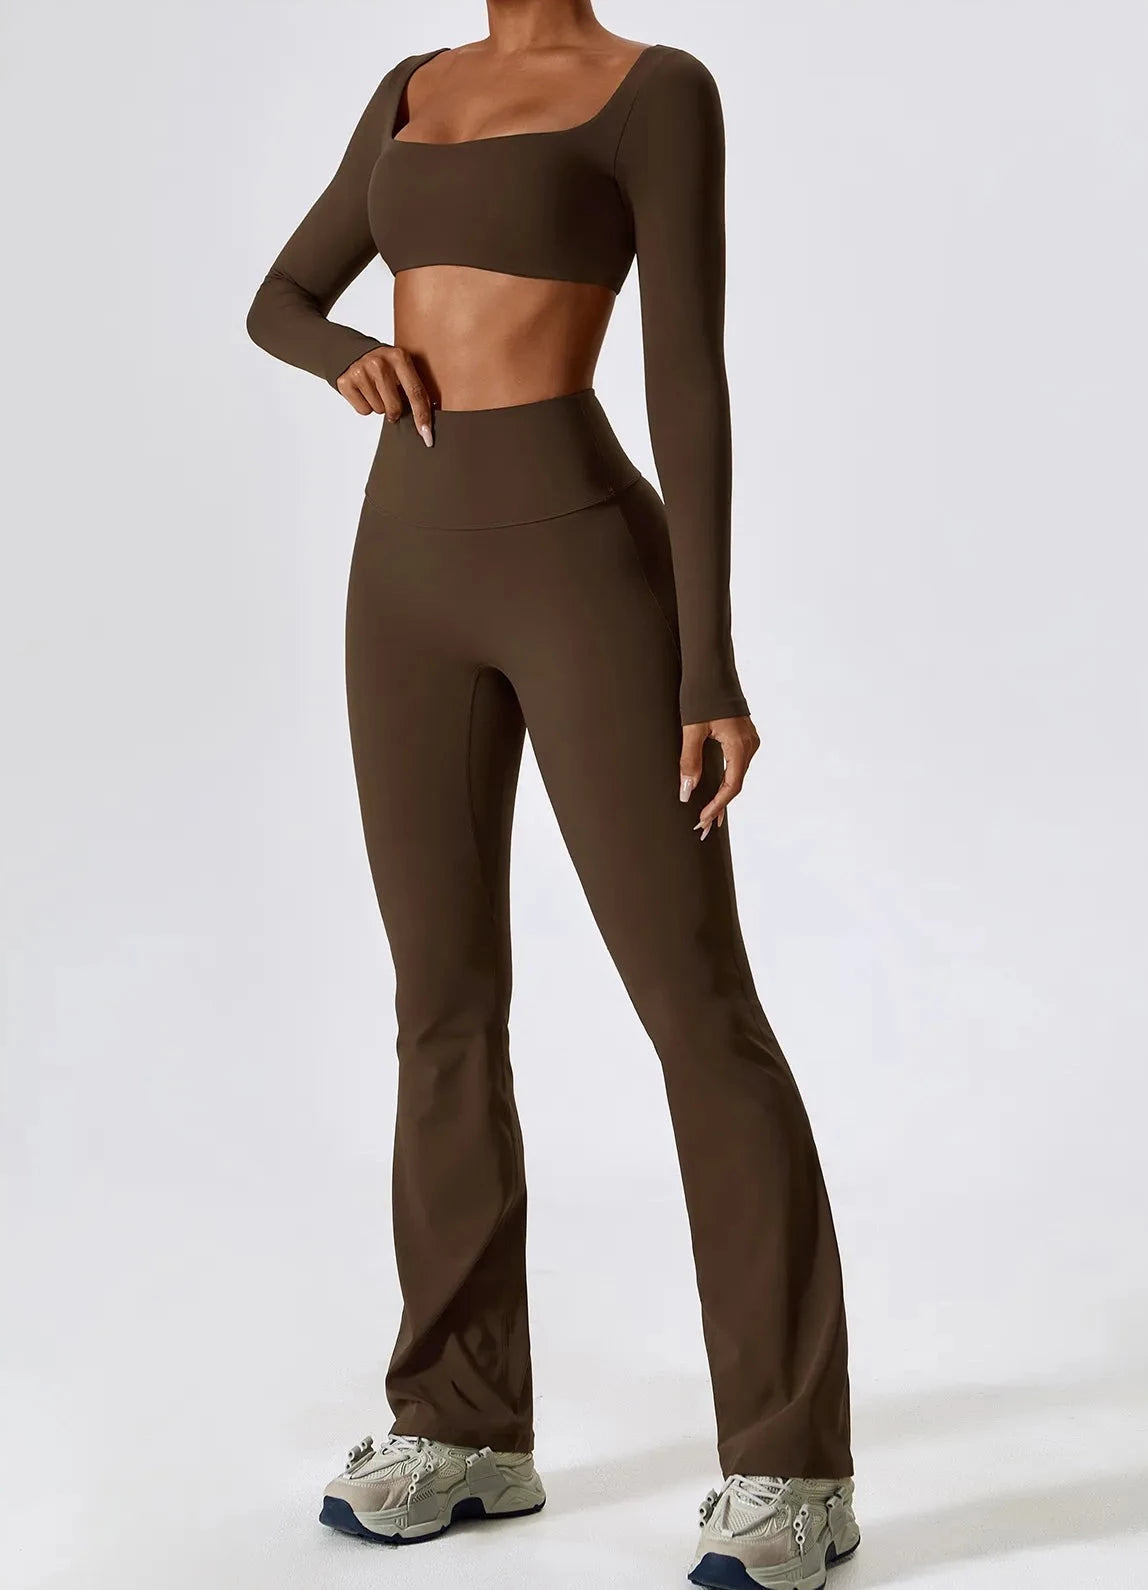 Brown Flare Leggings, Flare Tights